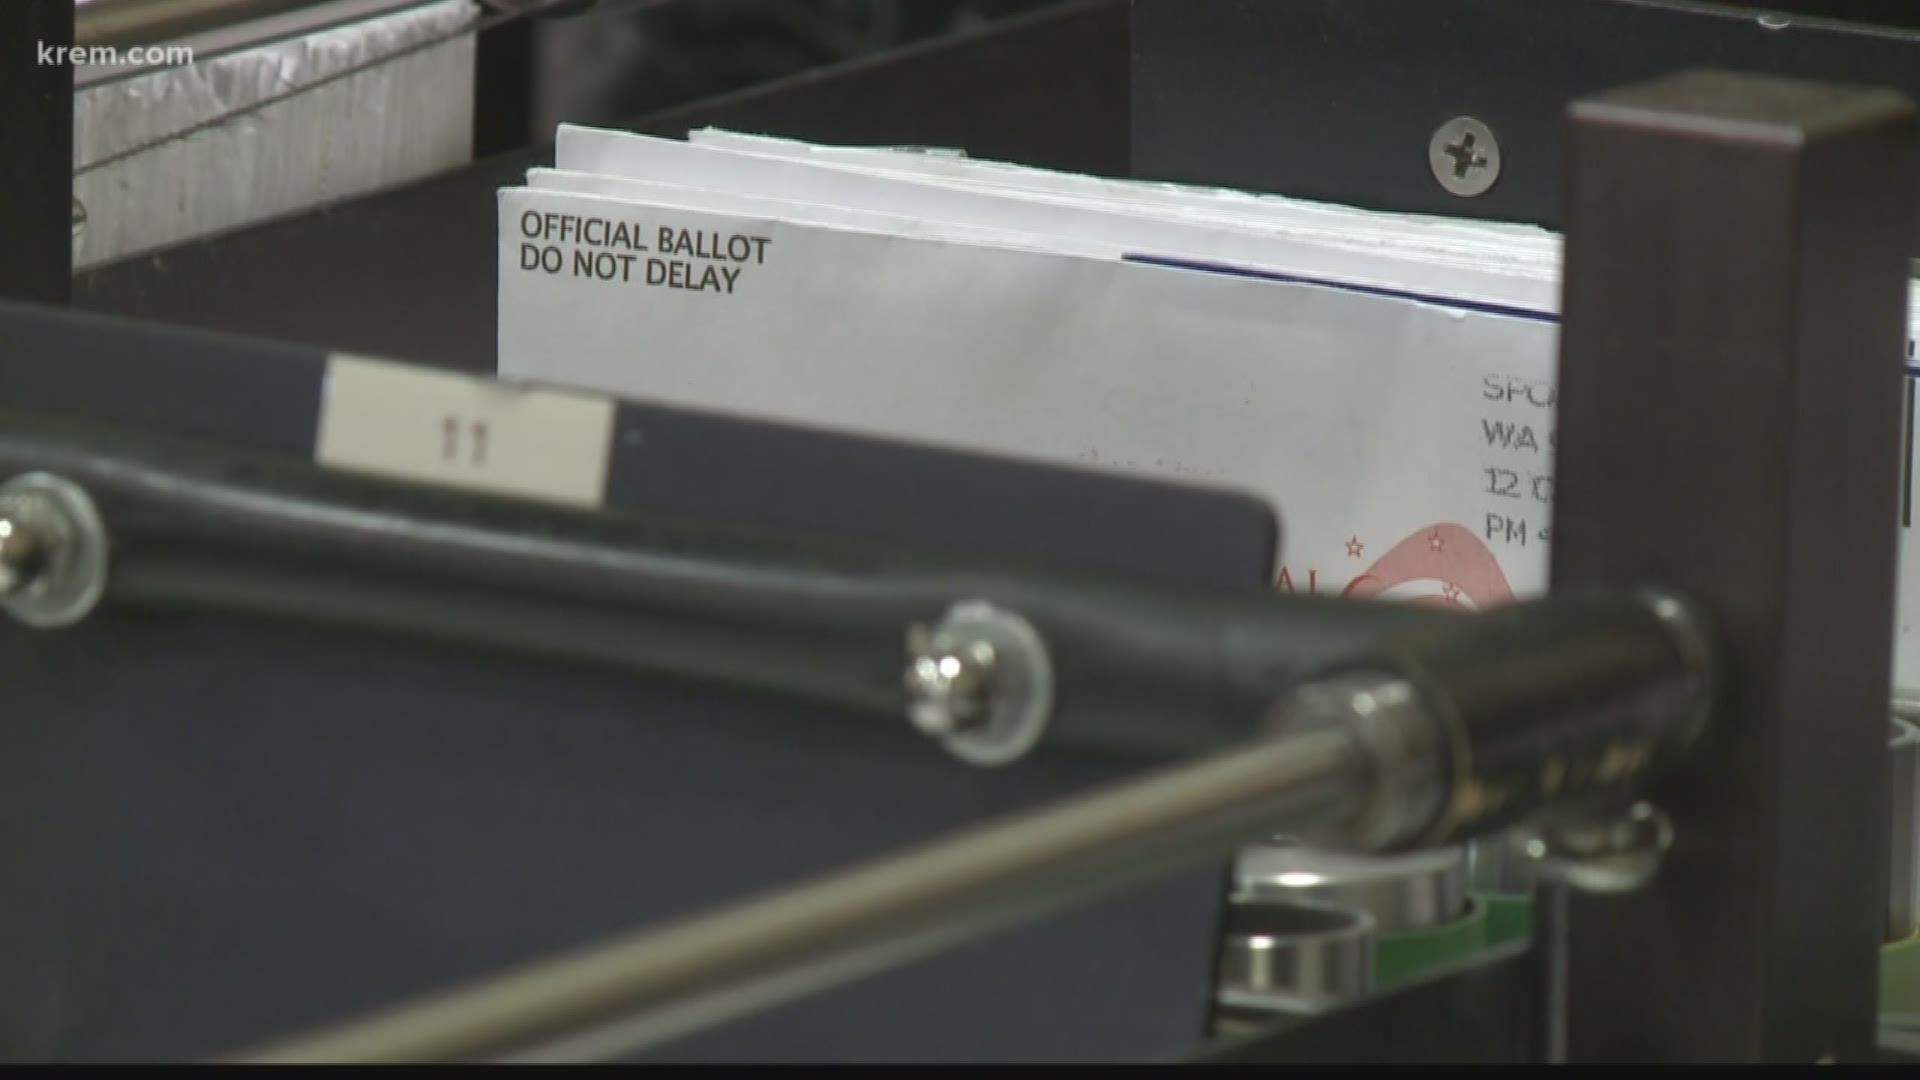 County records show as of 4 p.m. Monday there were 14,338 ballots returned. This is practically double the amount of ballots returned on this day in the 2010, 2012, 2014 and 2016 elections.